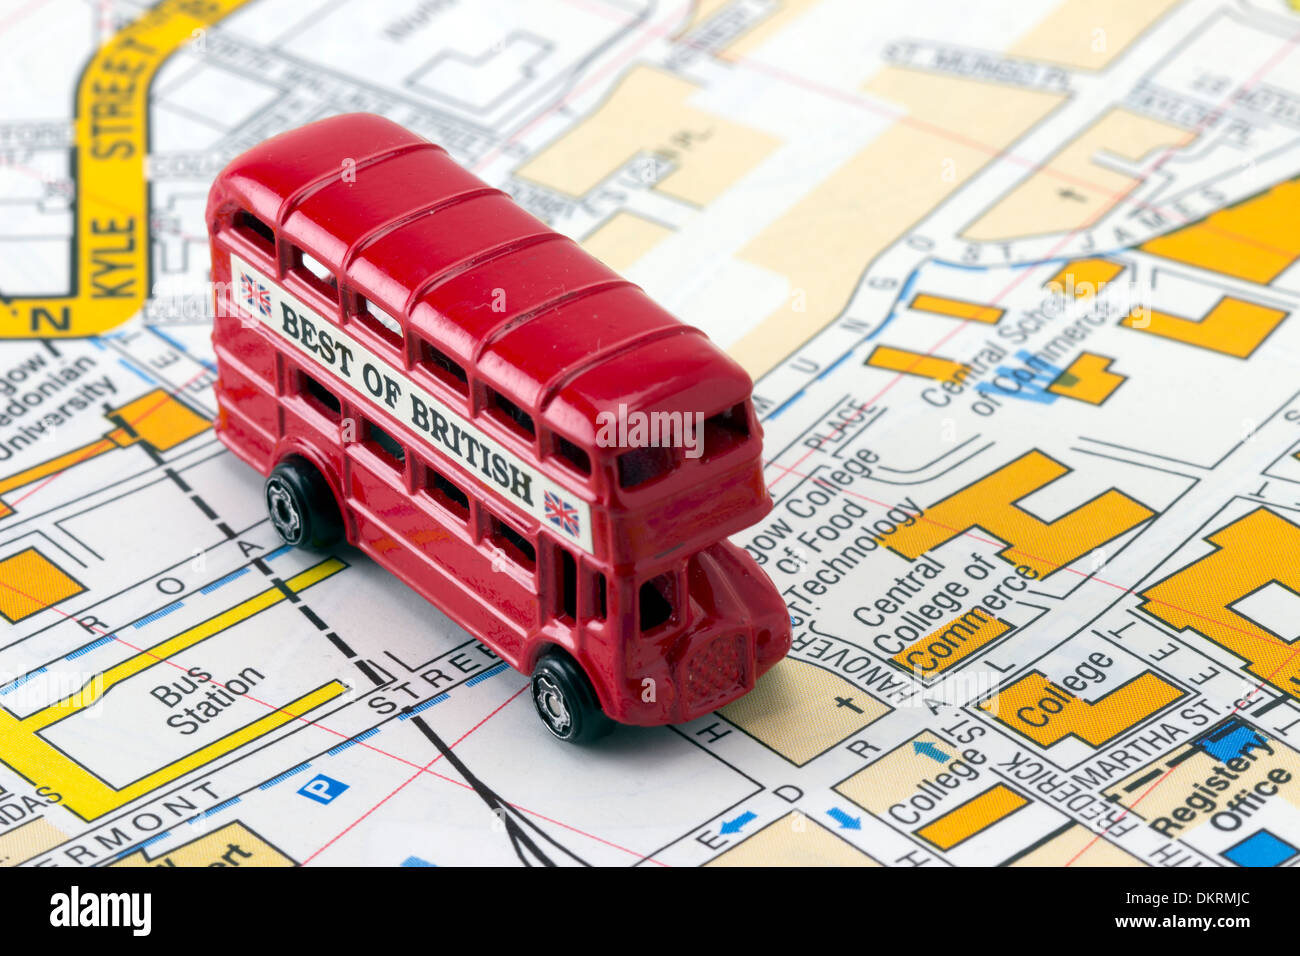 Toy Red Bus on Map en route to Bus Station Stock Photo